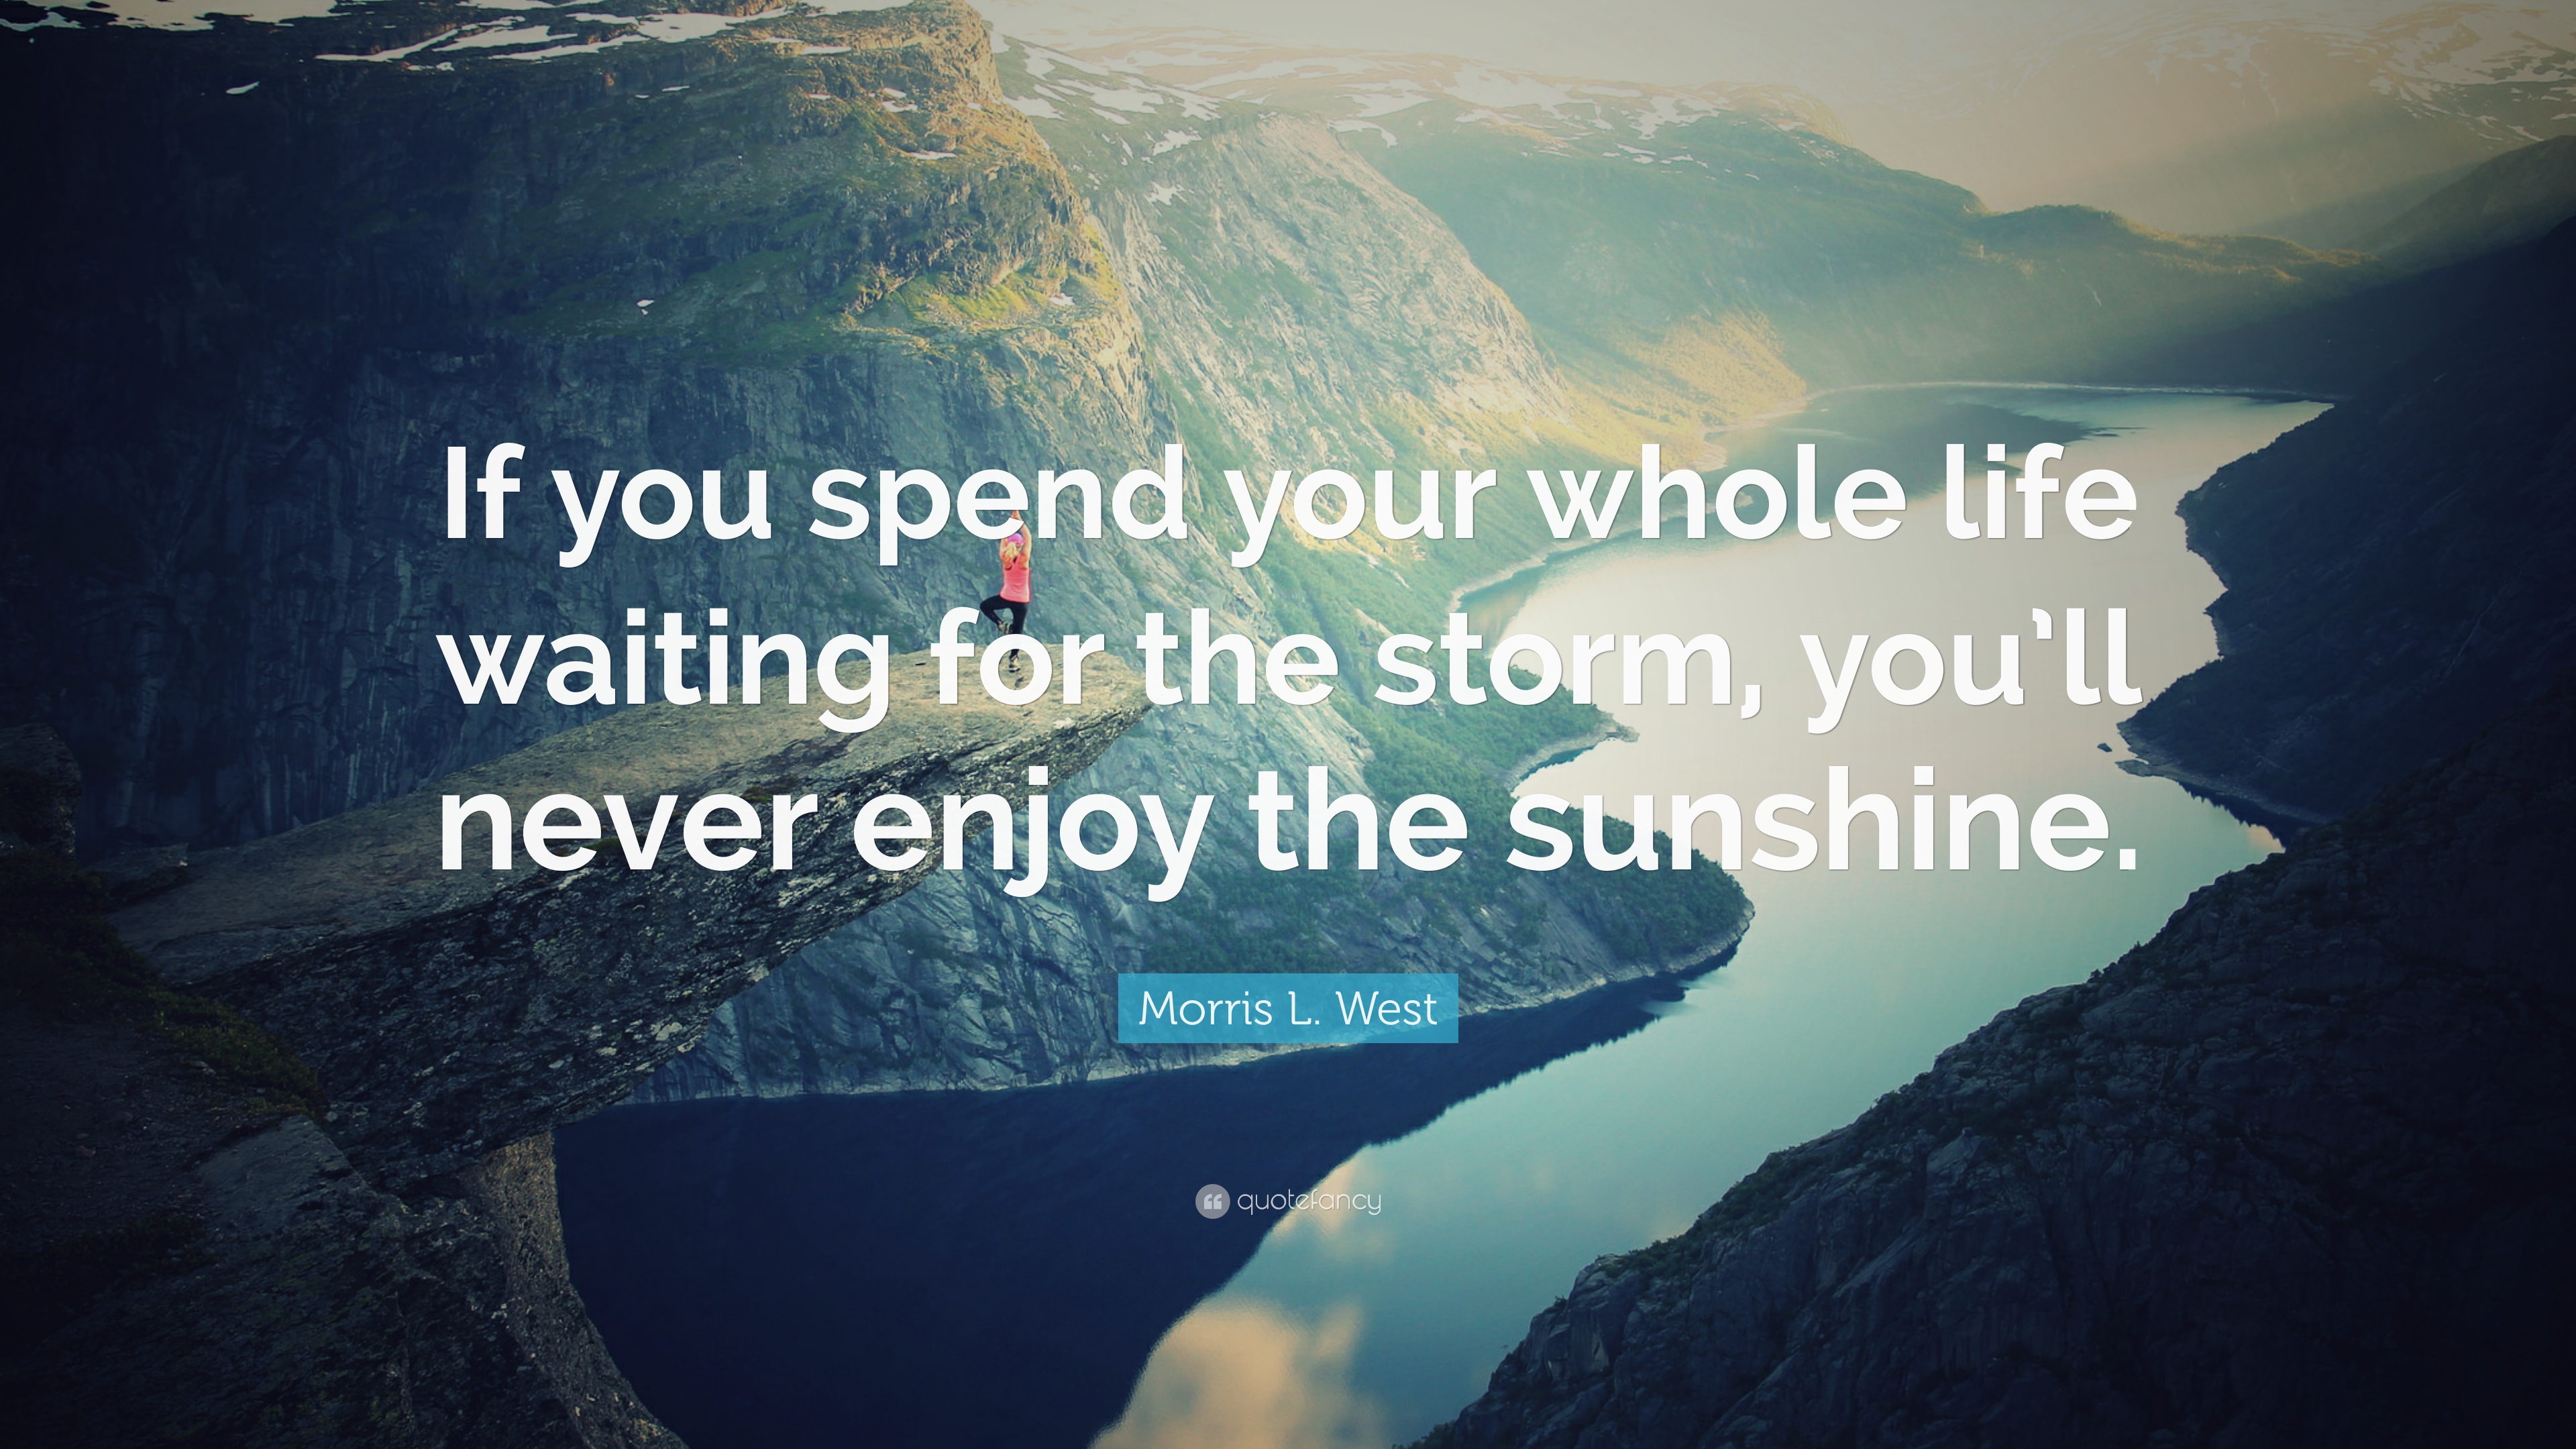 If you spend your whole life waiting for the storm, you’ll never enjoy the sunshine. Morris L. West